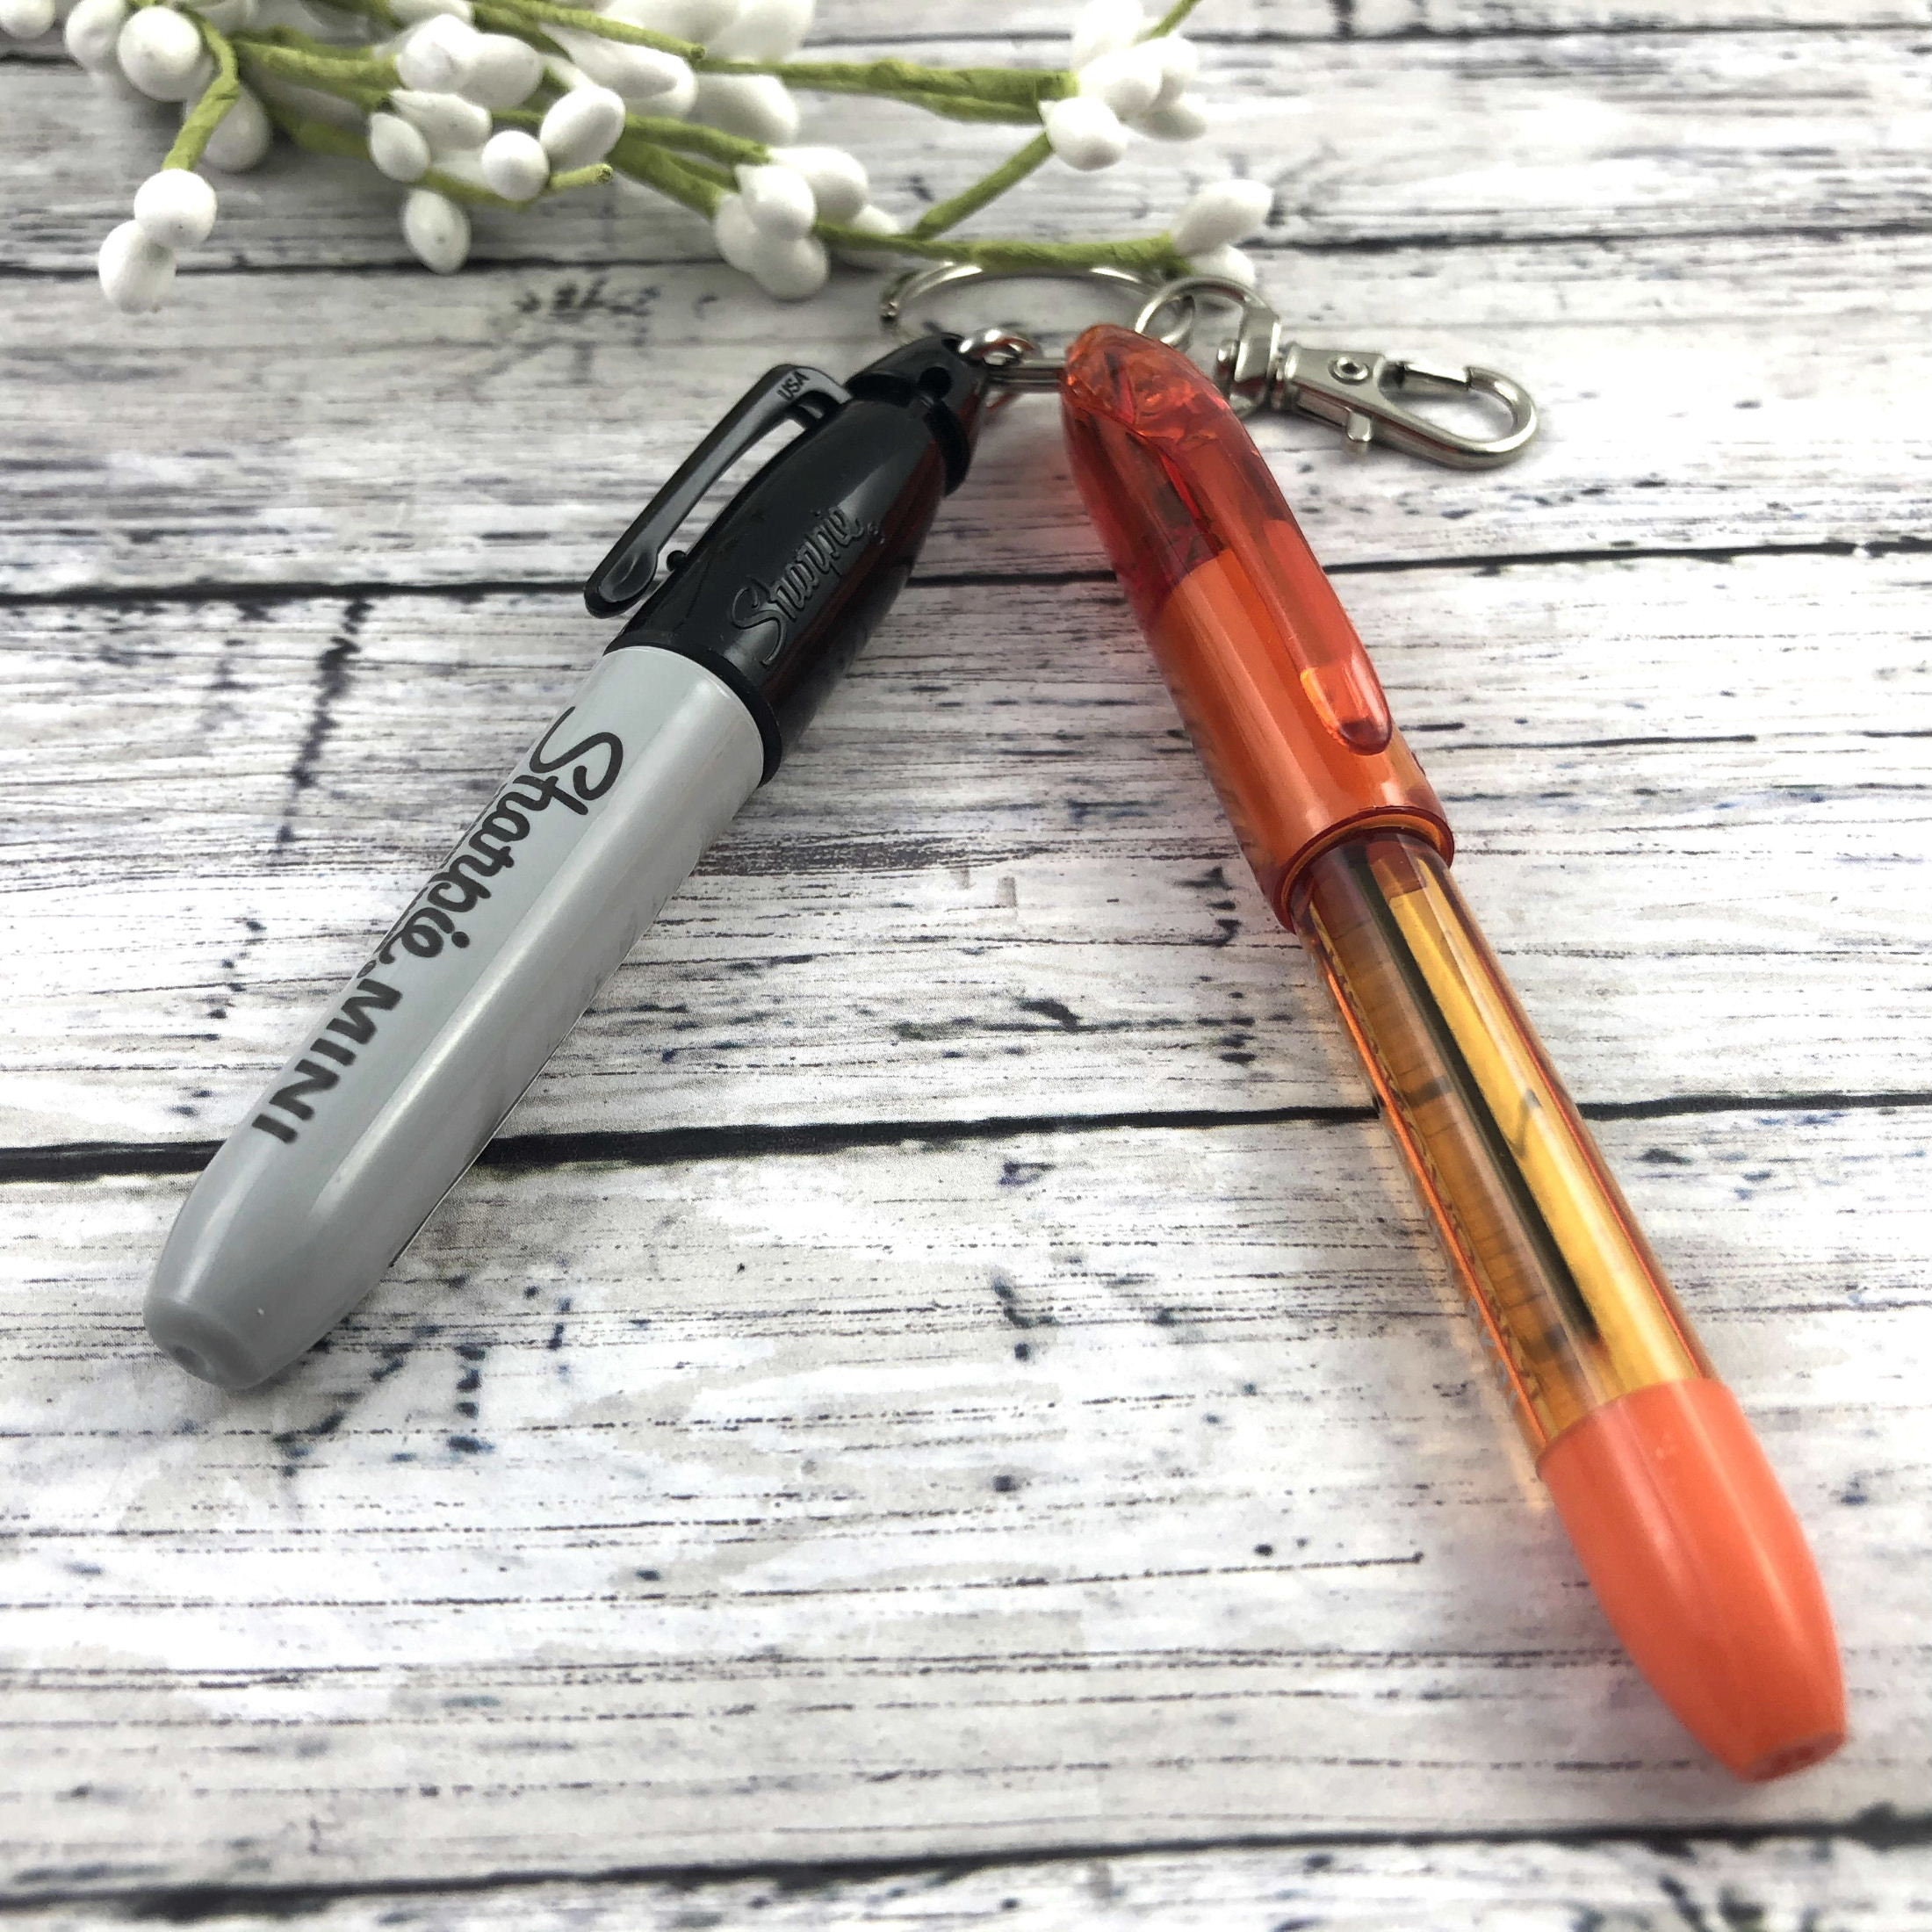 Sharpie Mini and RSVP Mini Ballpoint Pen with Lanyard Clip for badge reel,  small marker and pen for ID, miniature marker, color nurse pen